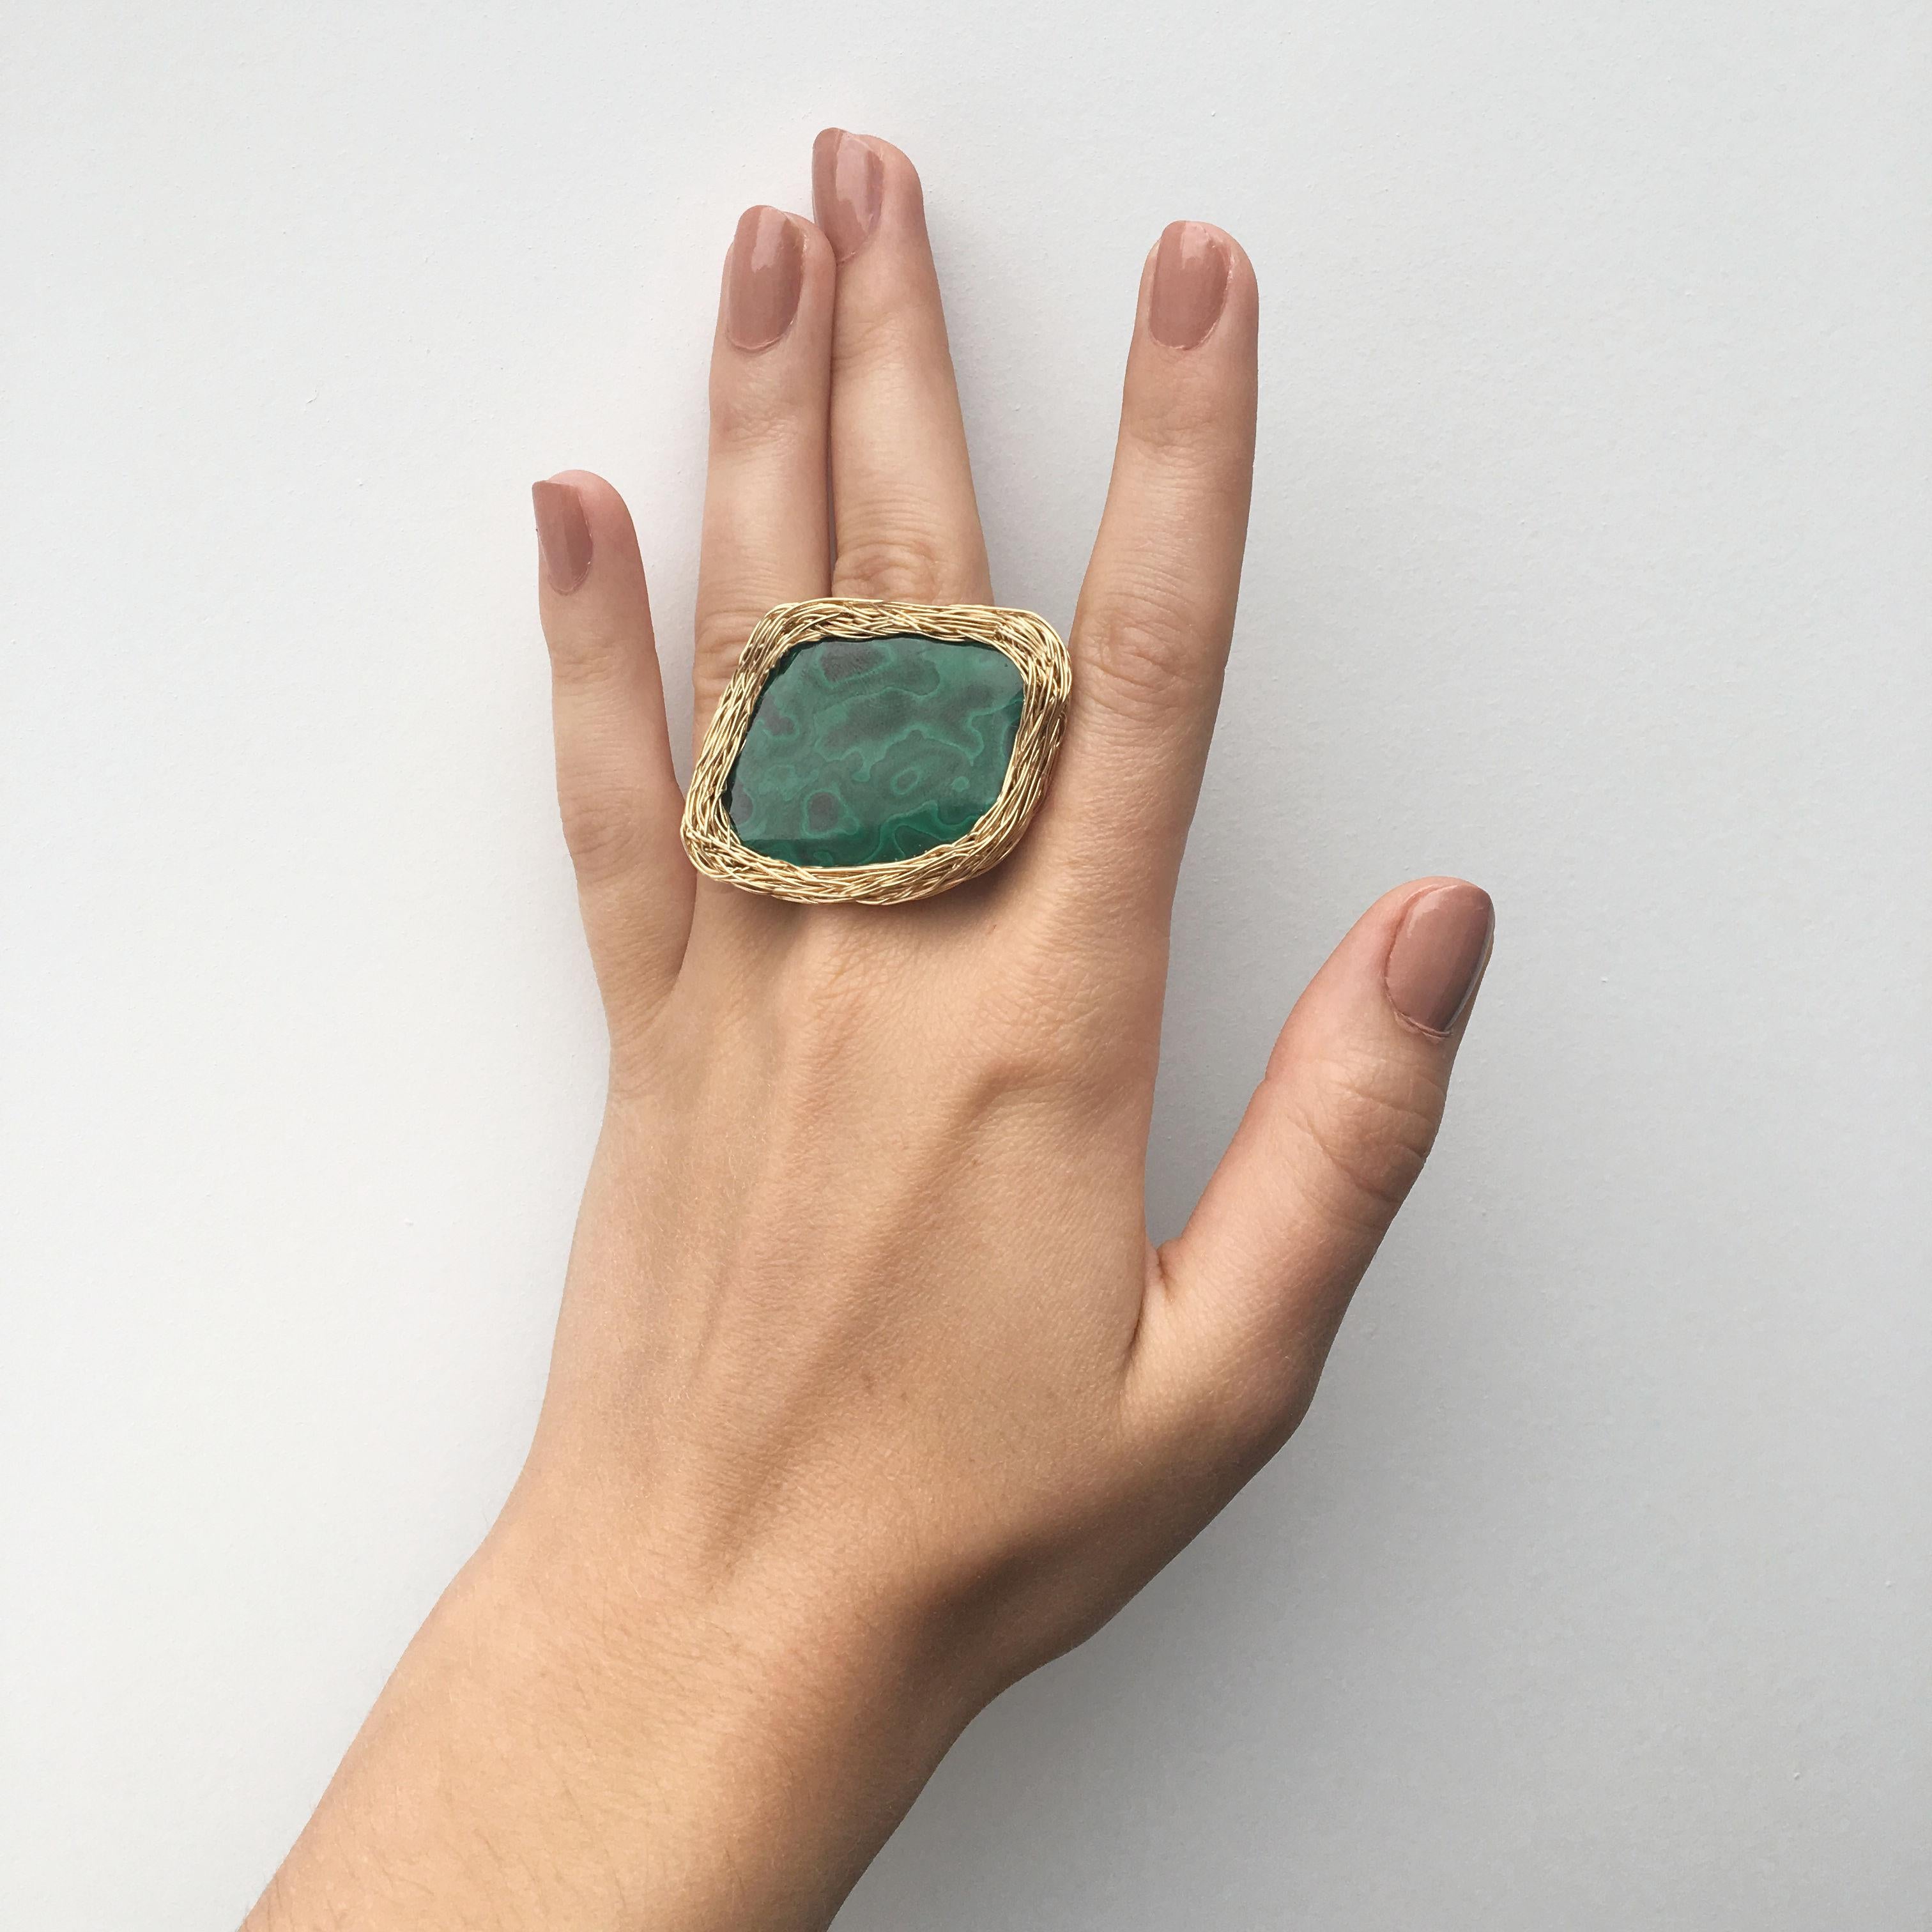 Greenest Gold and Malachite Statement Cocktail Ring by Sheila Westera London 1